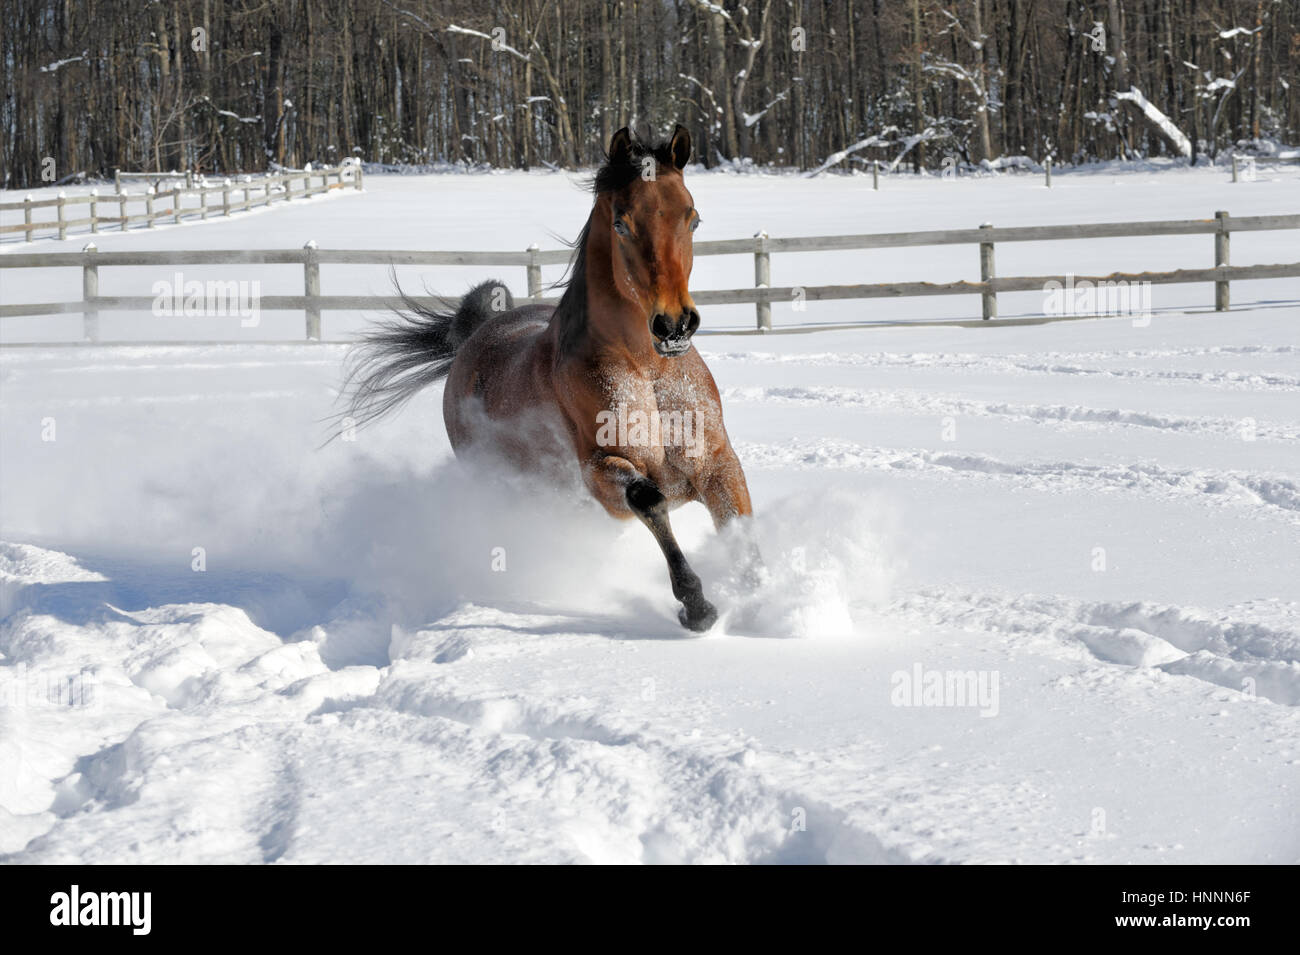 Exuberant Arabian Bay horse running and bucking in deep powder snow in a sunlit, fenced-in field in winter. Brown horse with a black mane kicking, USA Stock Photo